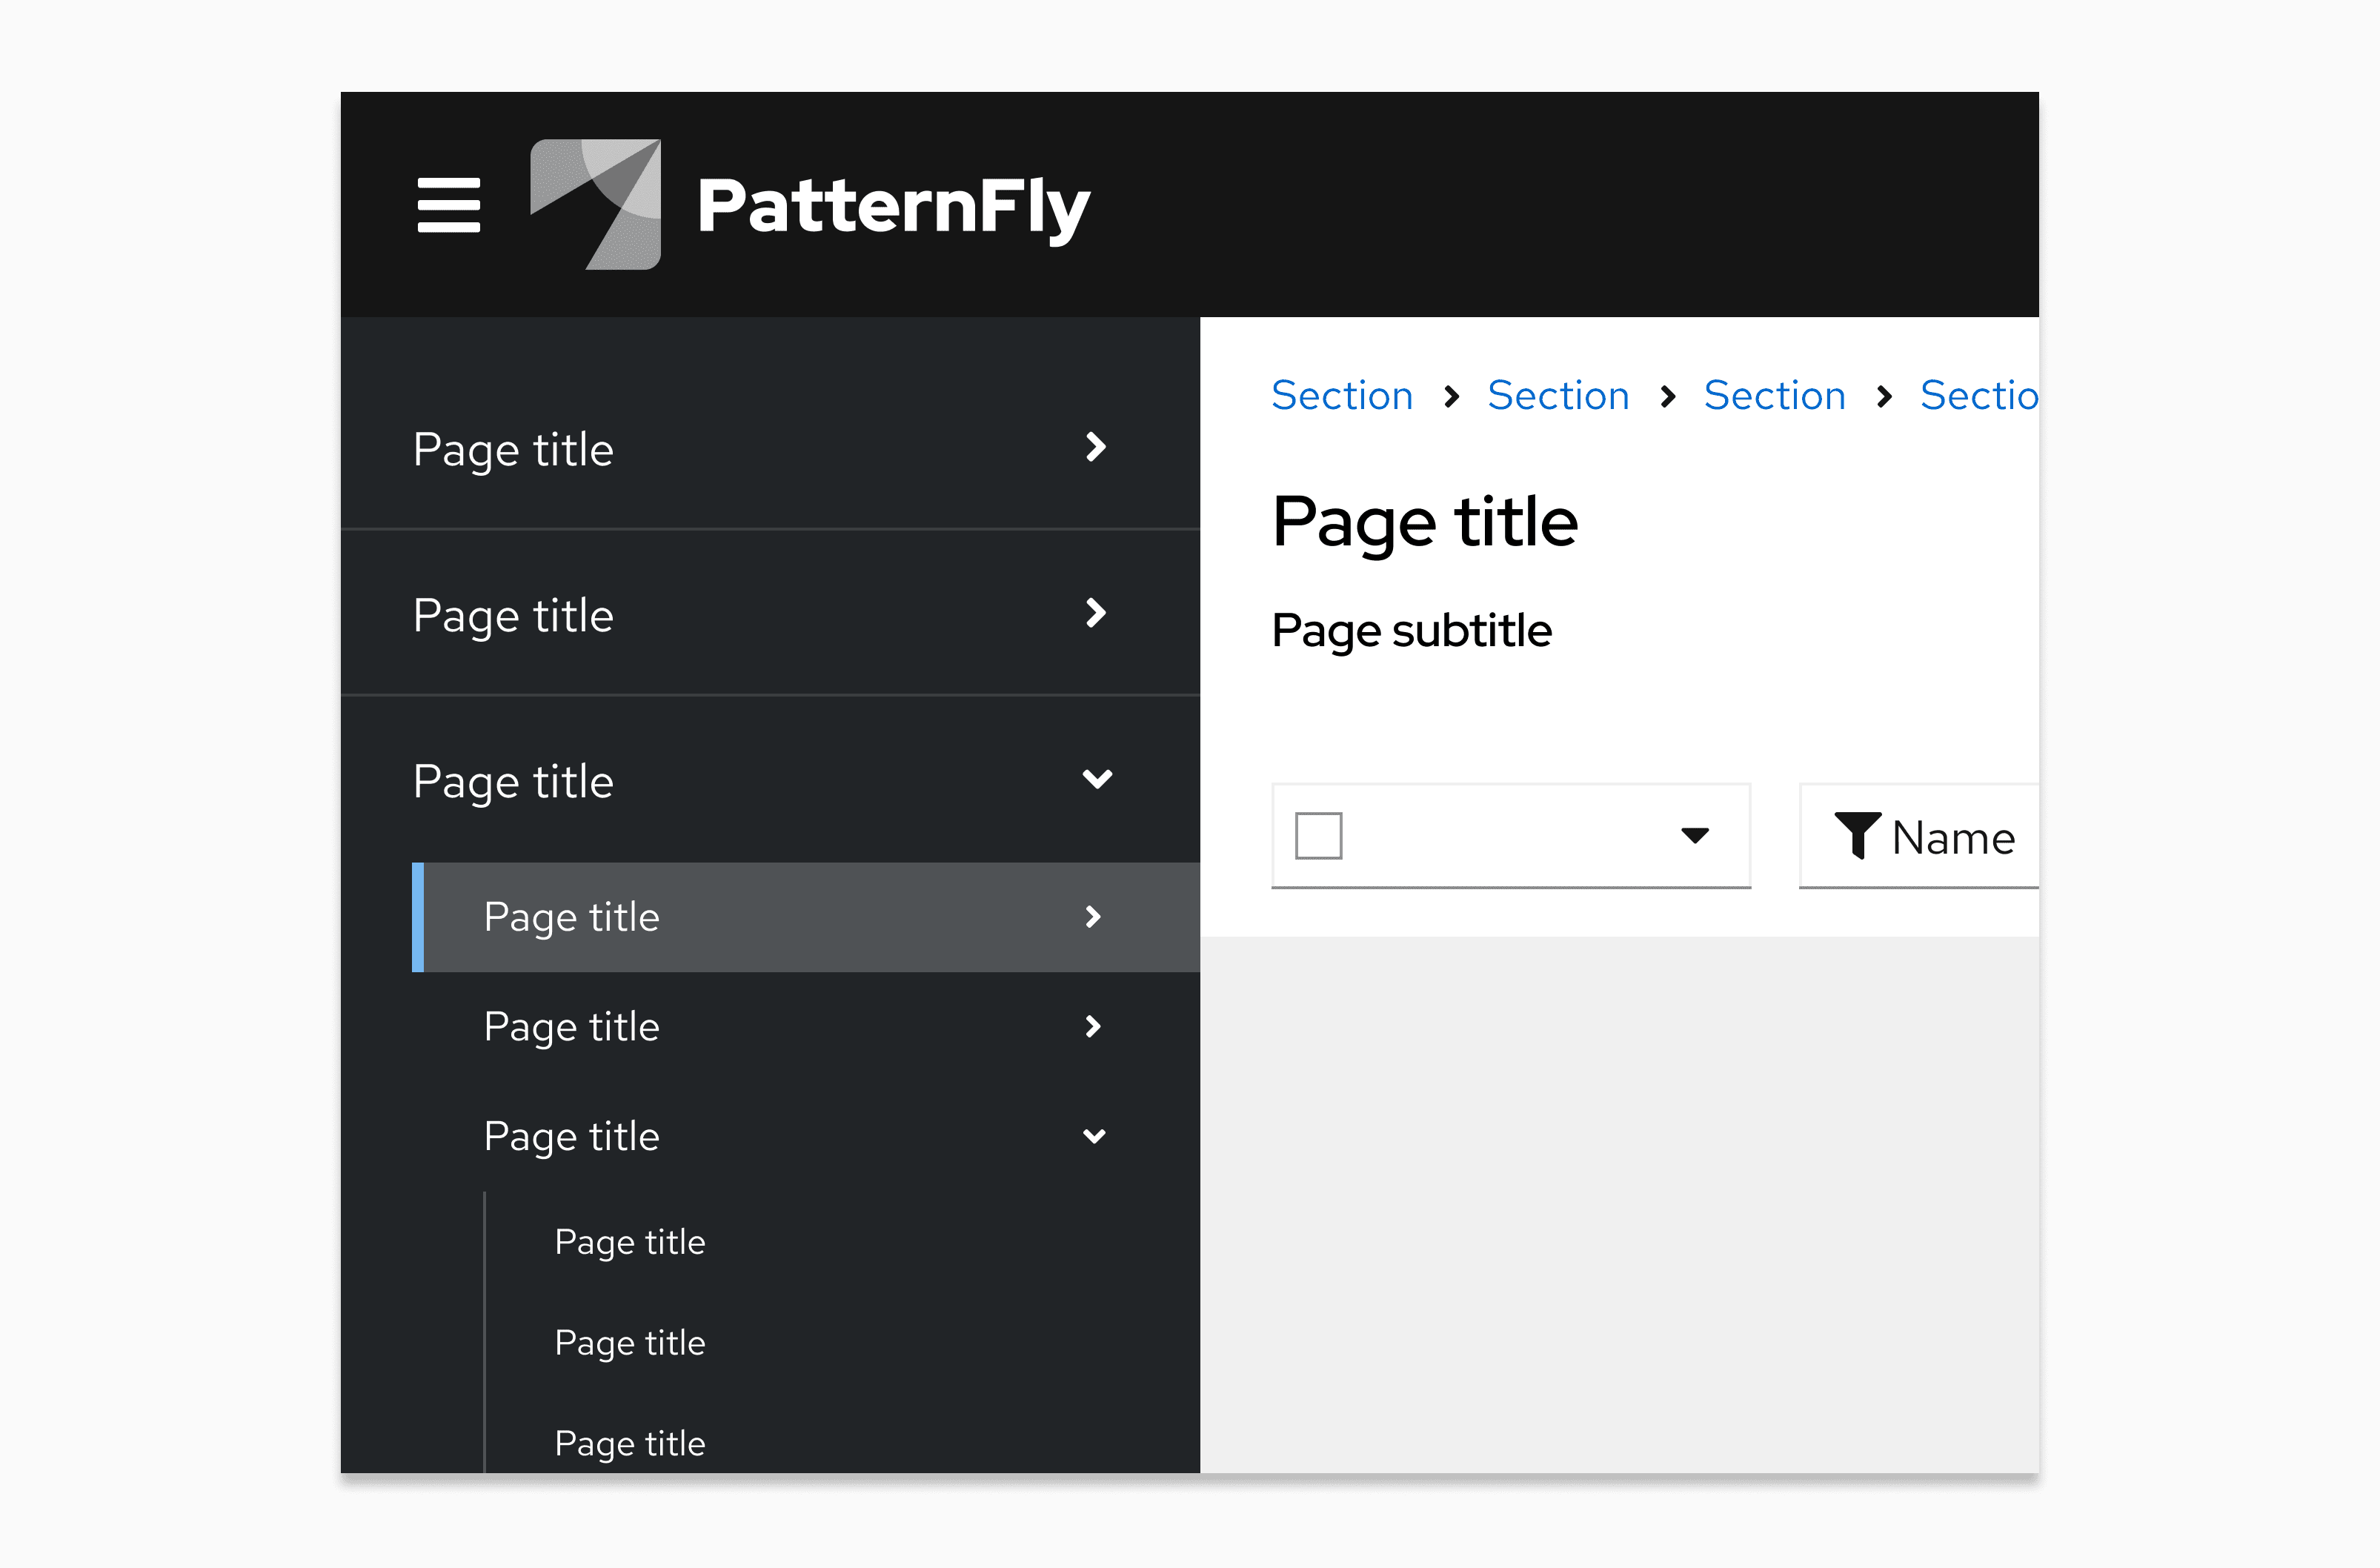 A side navigation menu, expanded to show capitalization styles.